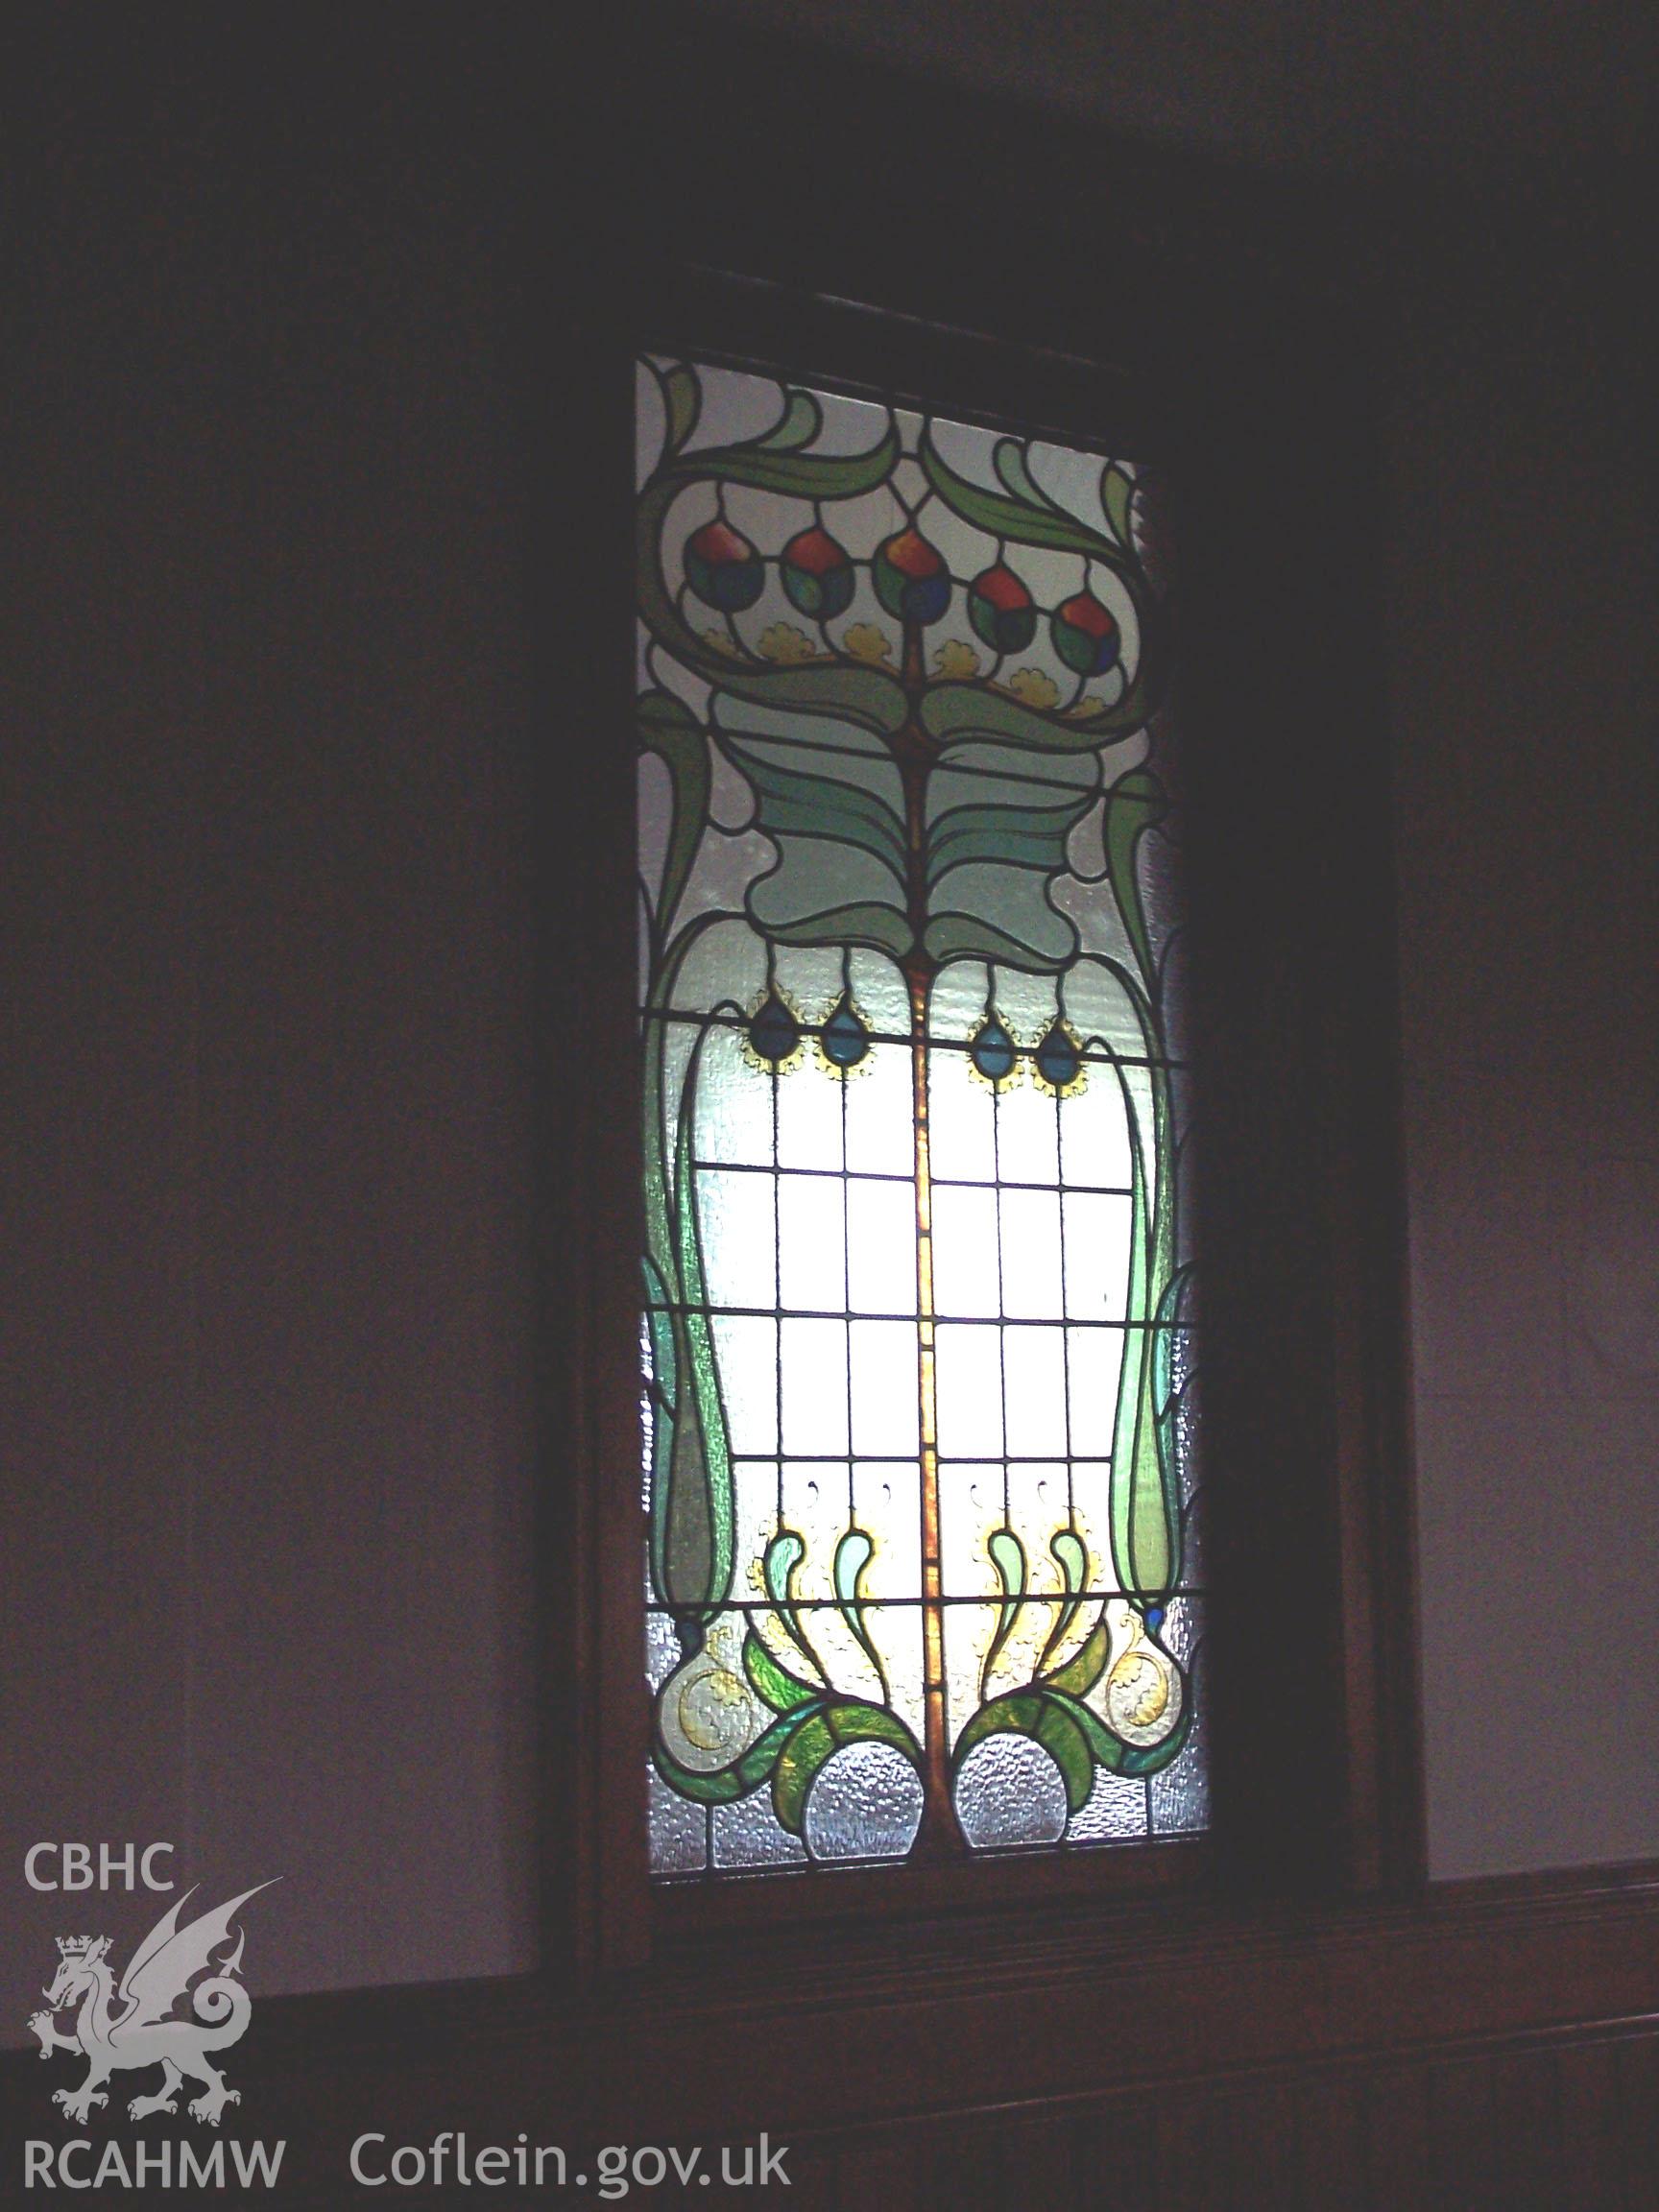 Chapel: Interior - stained glass window between lobby and main chapel.